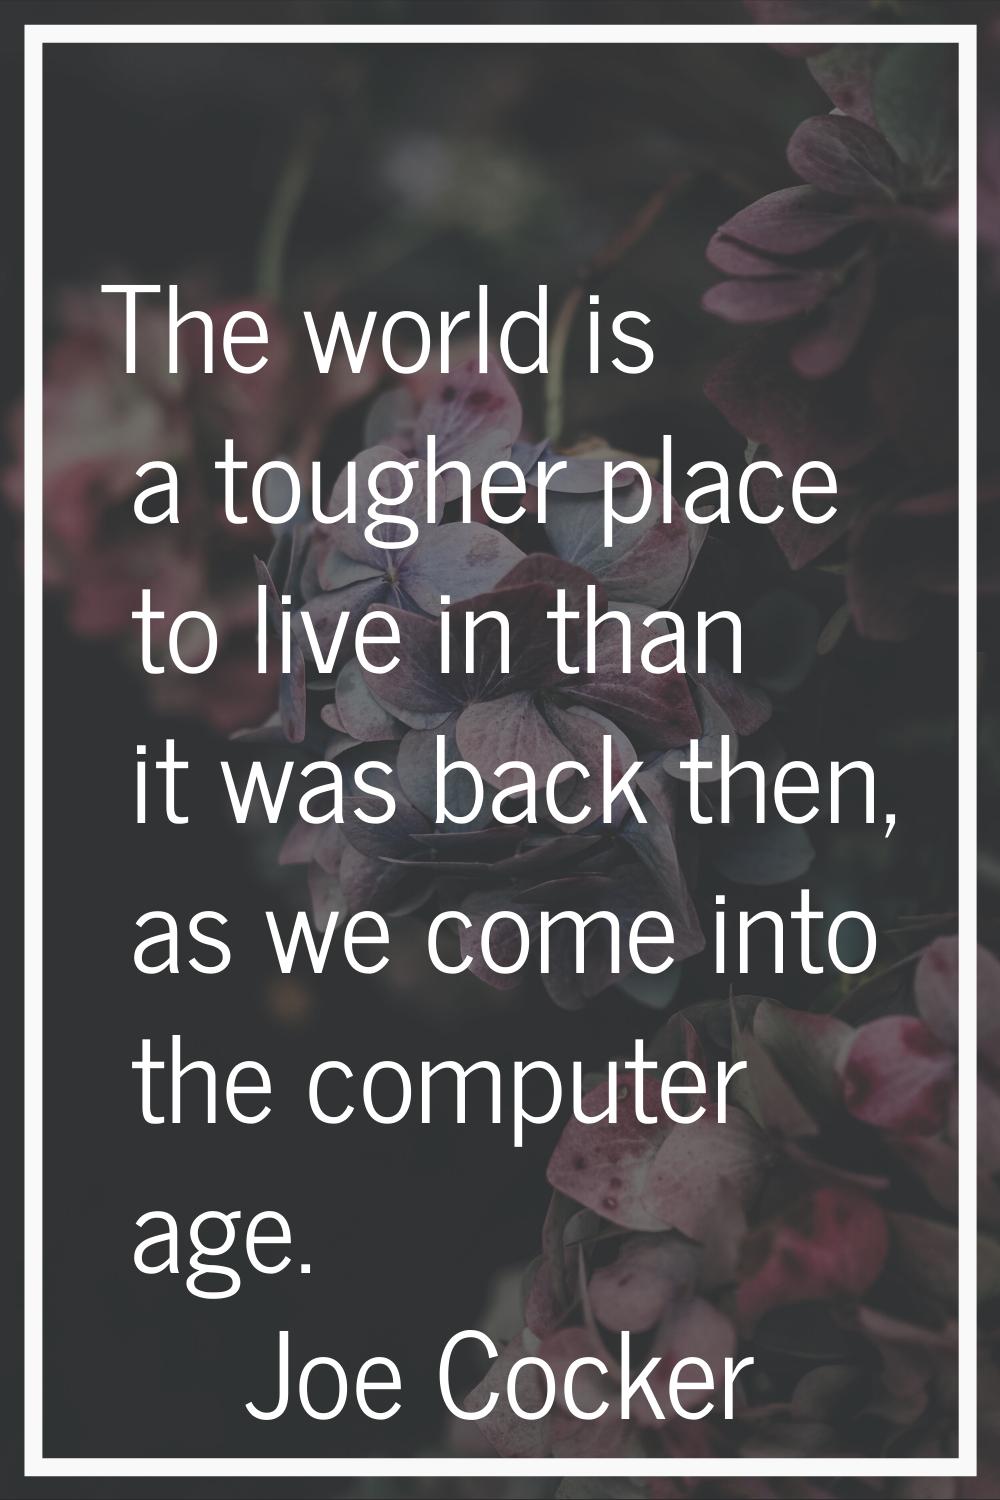 The world is a tougher place to live in than it was back then, as we come into the computer age.